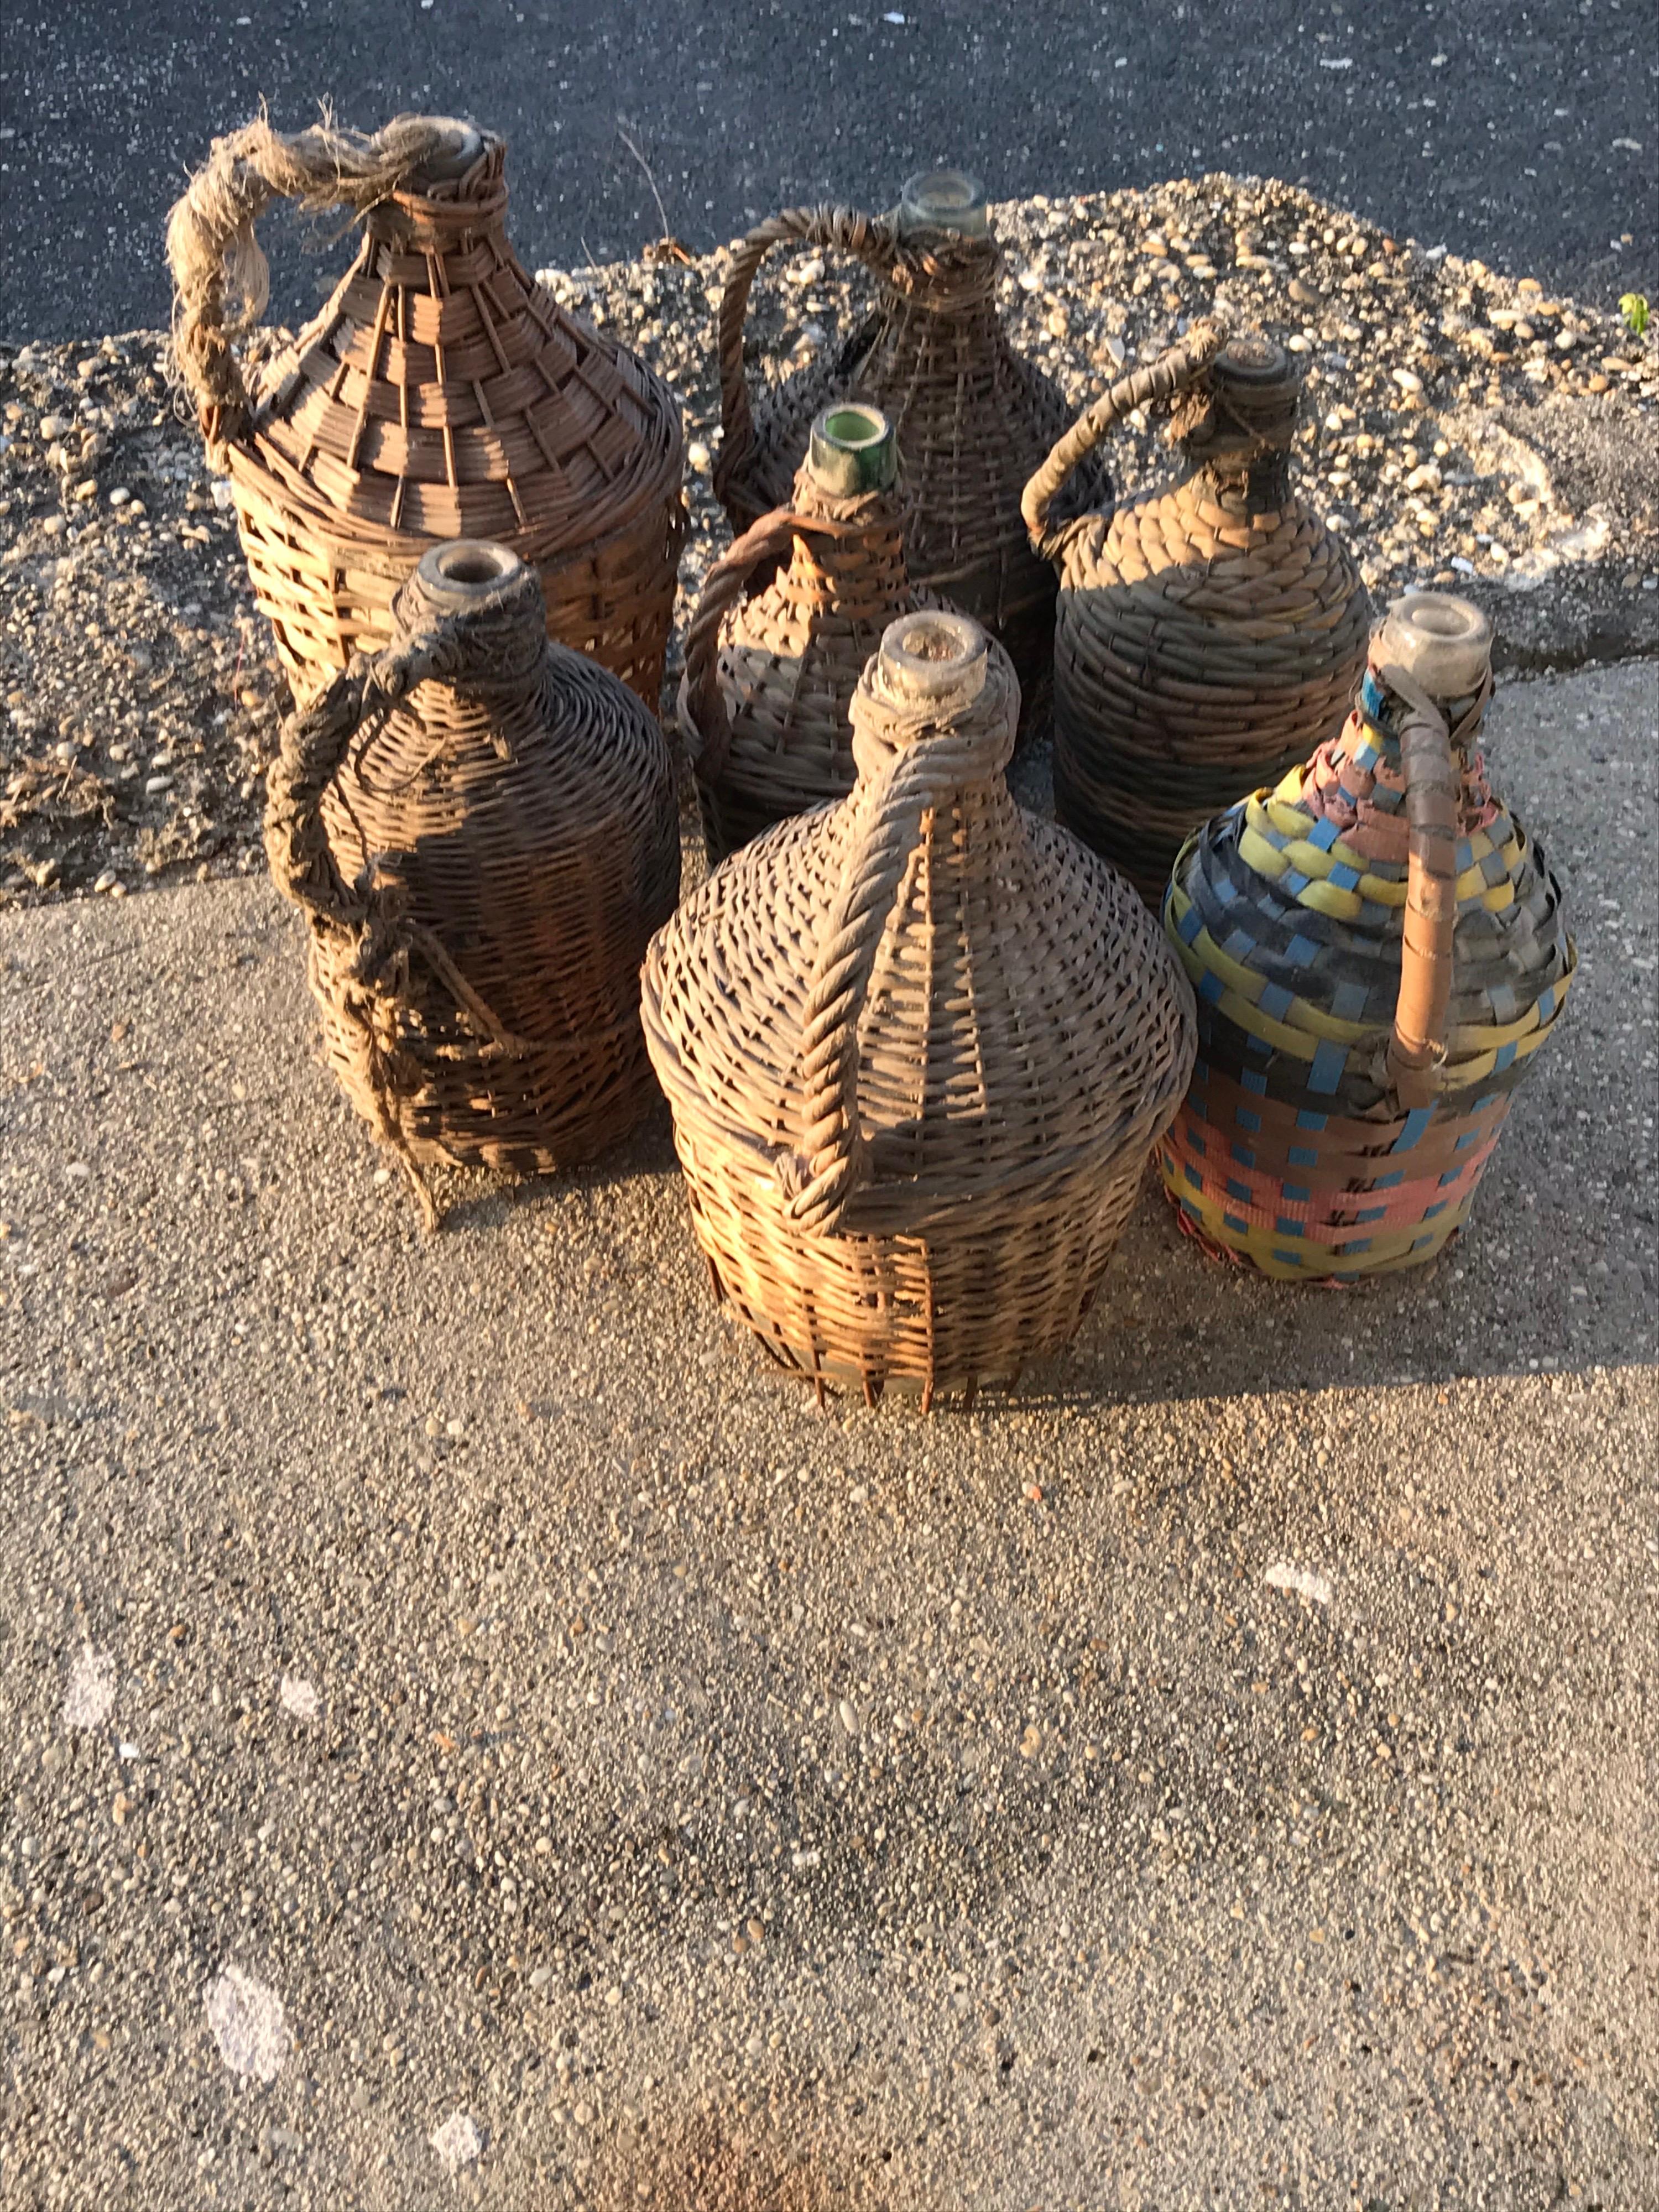 Set of seven midcentury vintner woven baskets with demijohn wine bottles
Each basket is nicely aged with lovely patina and show of age and use.
Size large: 20Q40H
small: 16Q32 H.